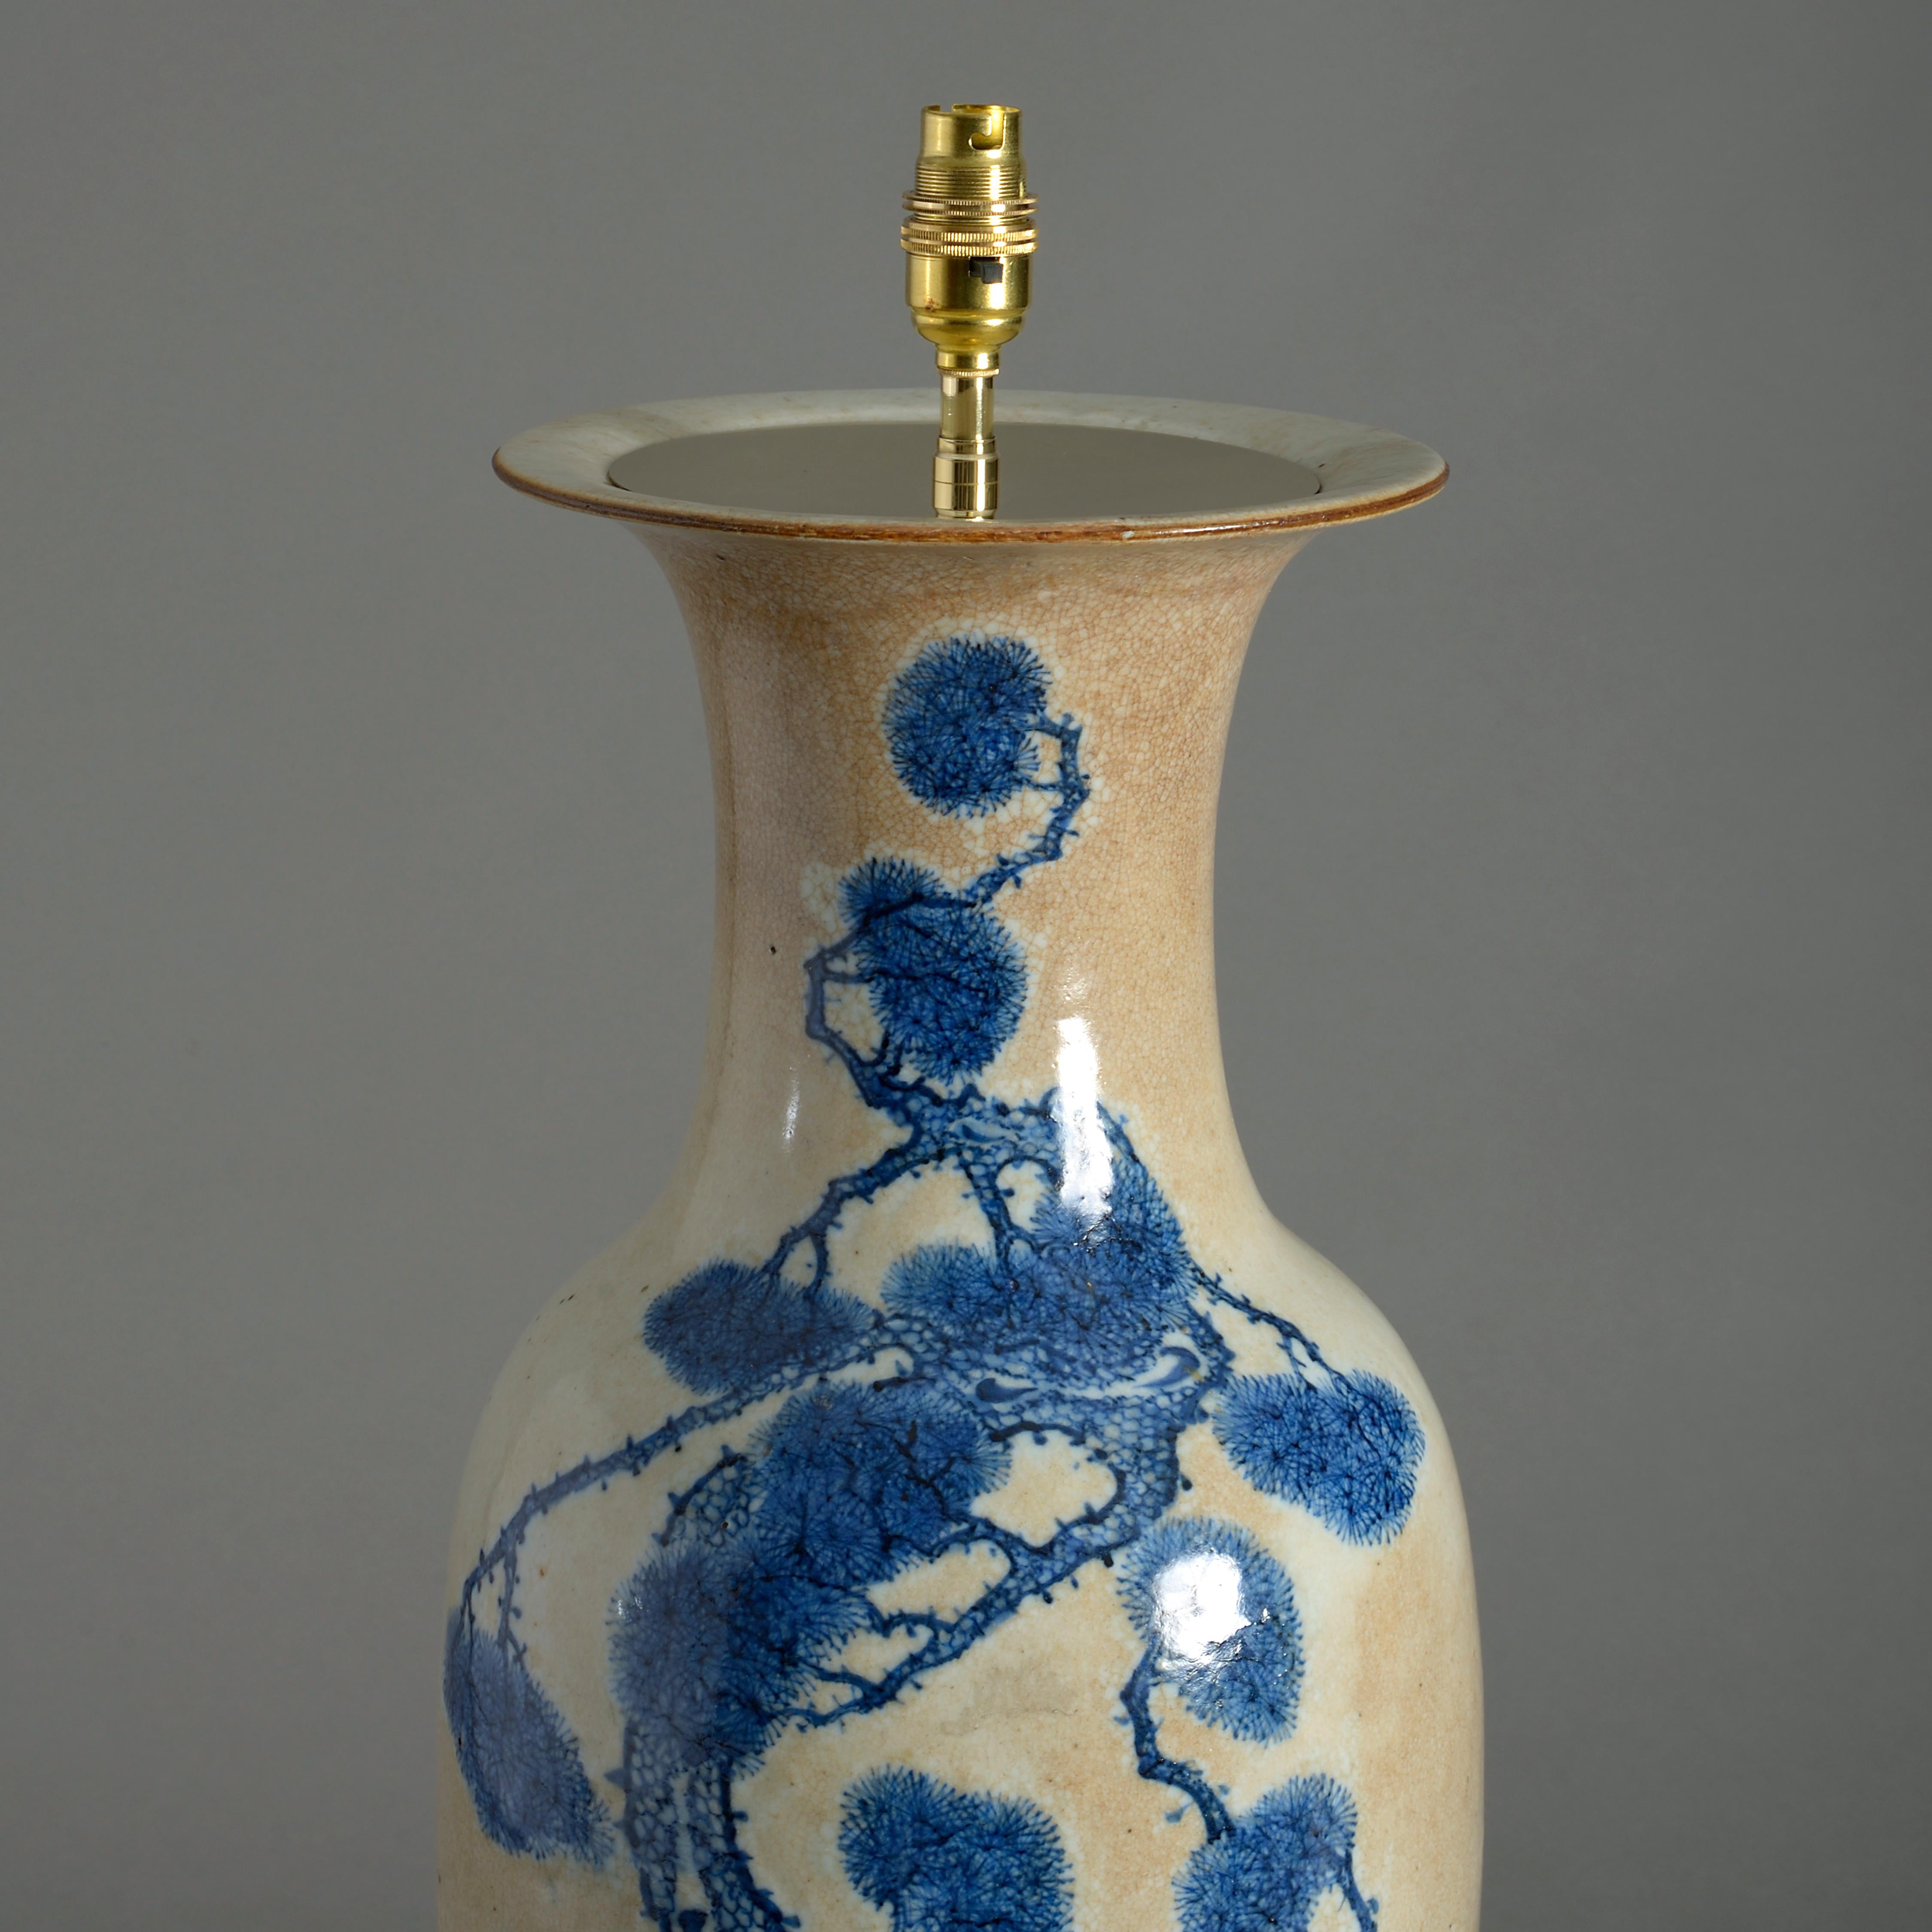 Glazed Mid-19th Century Chinese Export Porcelain Vase Lamp For Sale